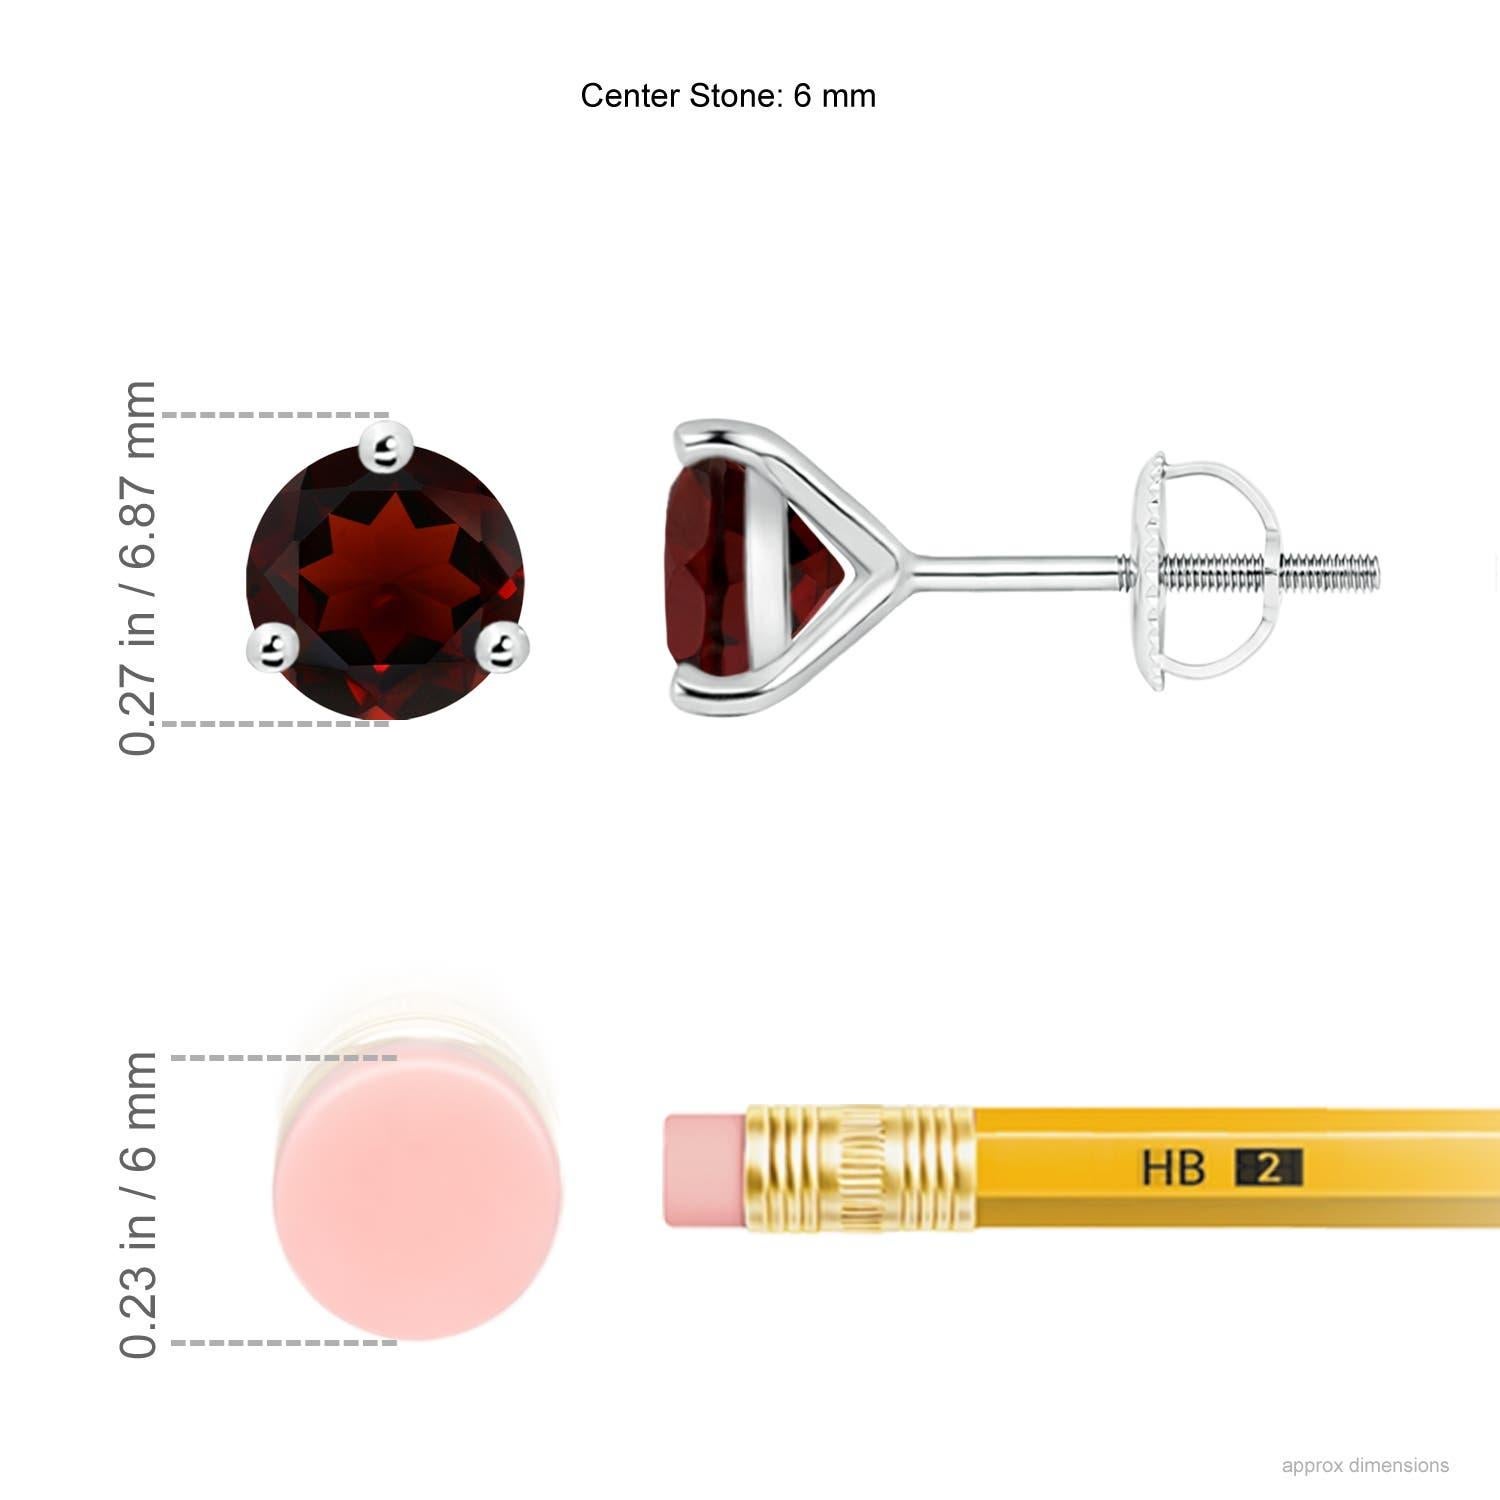 These pretty garnet stud earrings in platinum embody timeless elegance. The gorgeous gemstones are mounted in a three-prong martini setting and draw the eye with their charismatic red brilliance.